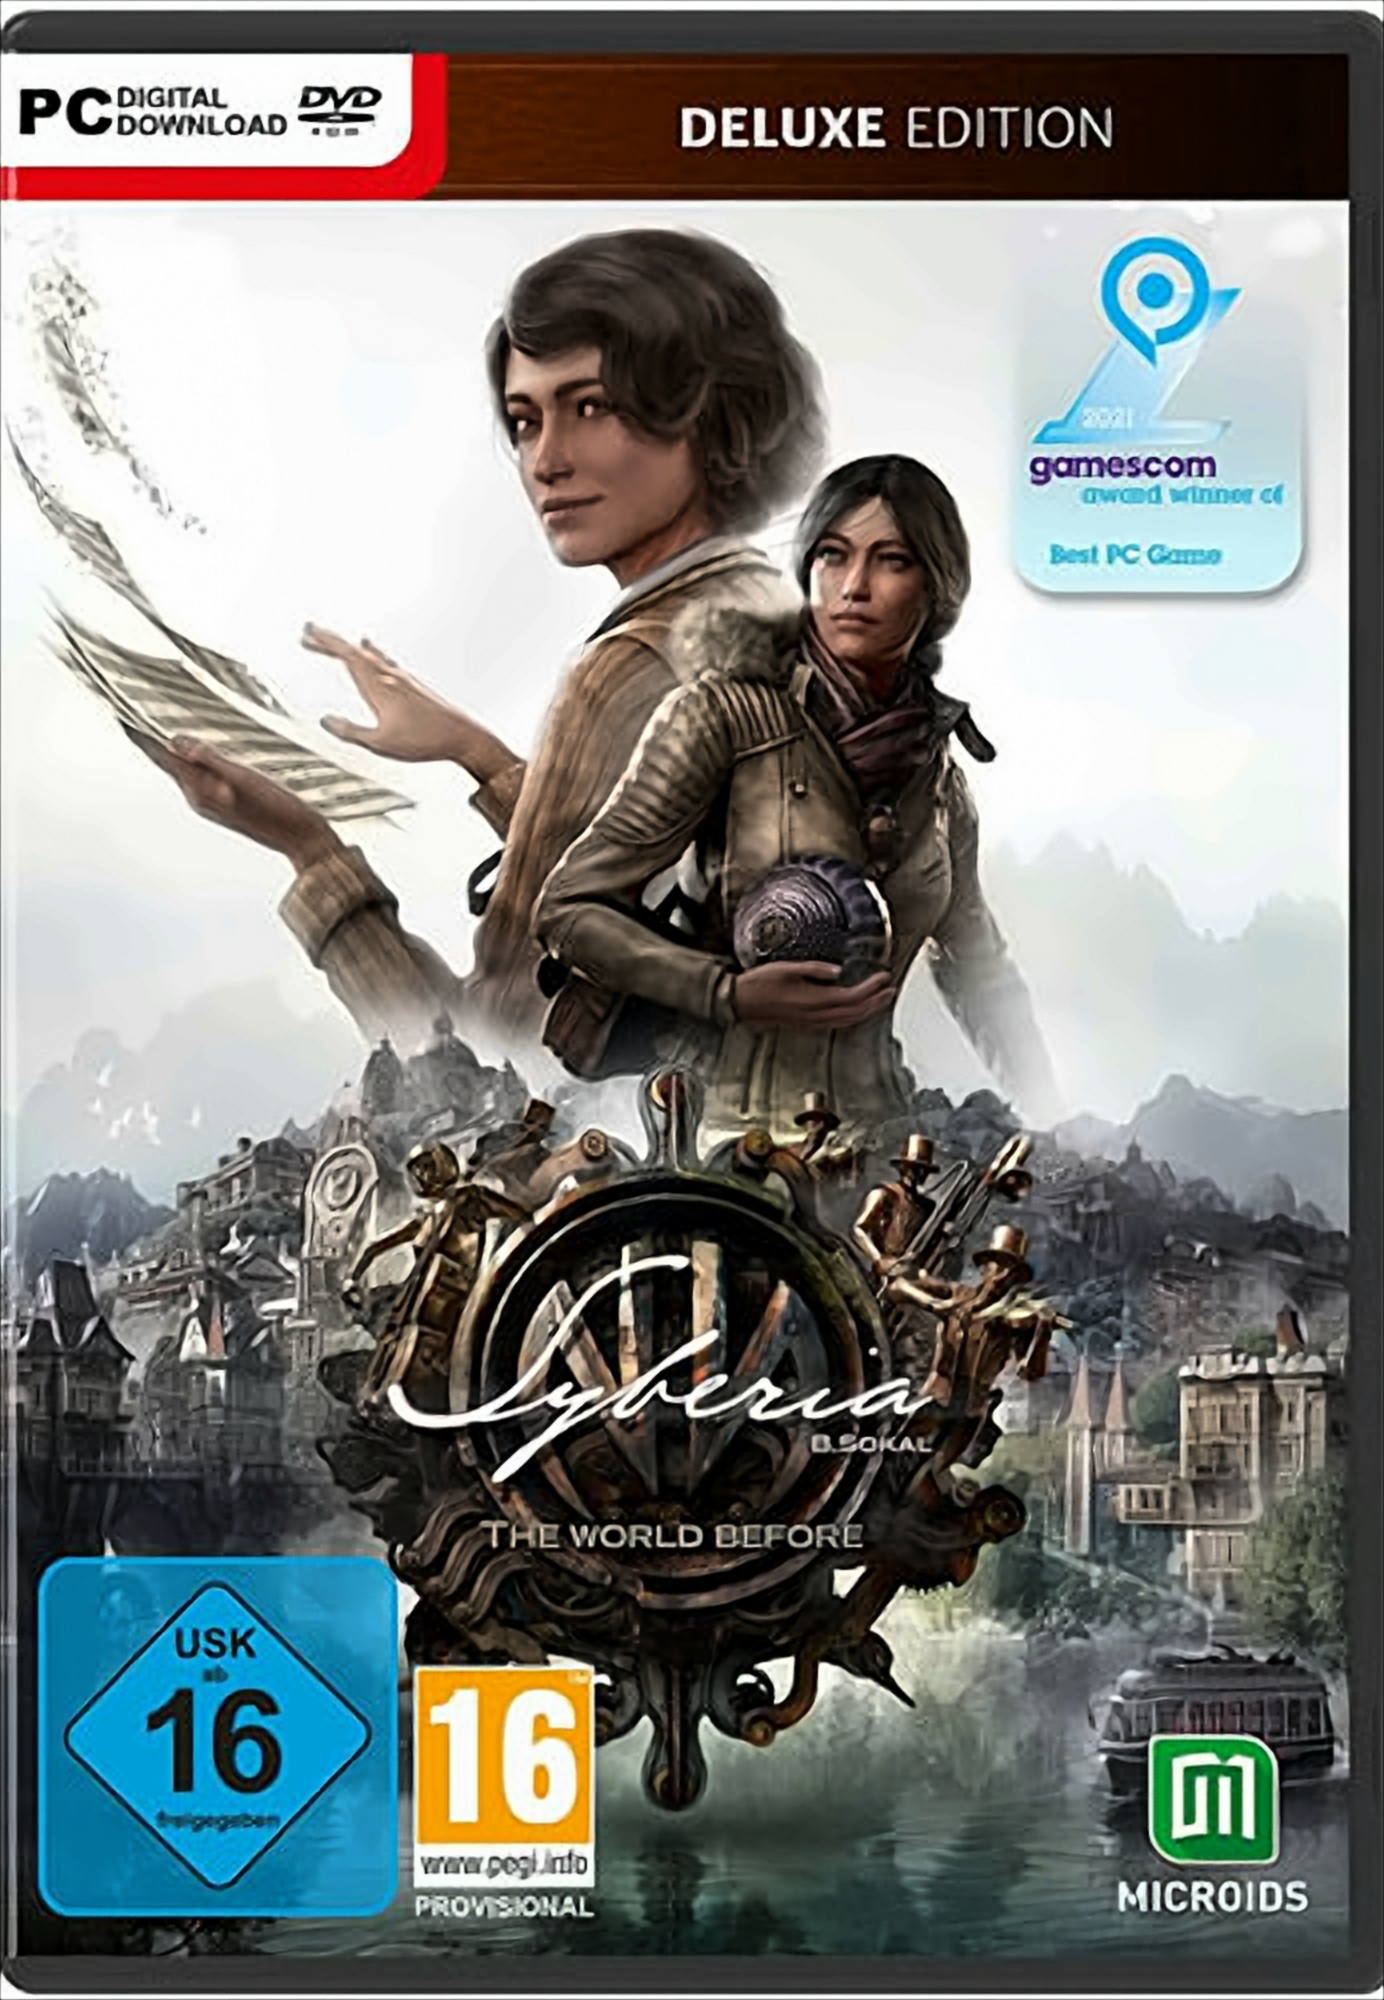 PC [PC] - Before The DELUXE Syberia: World